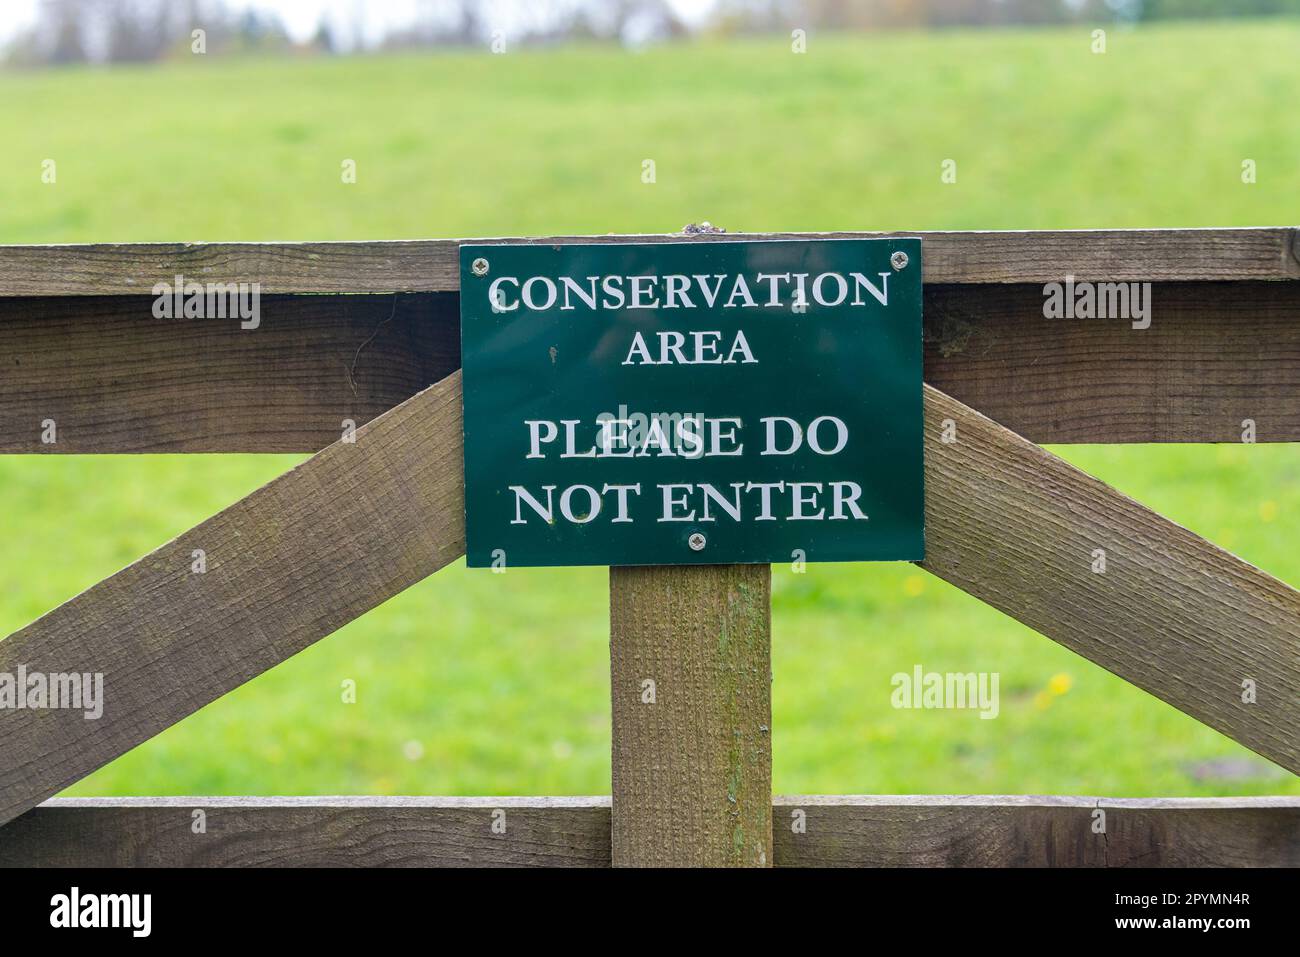 Conservation area, please do not enter sign on a wooden gate. Stock Photo